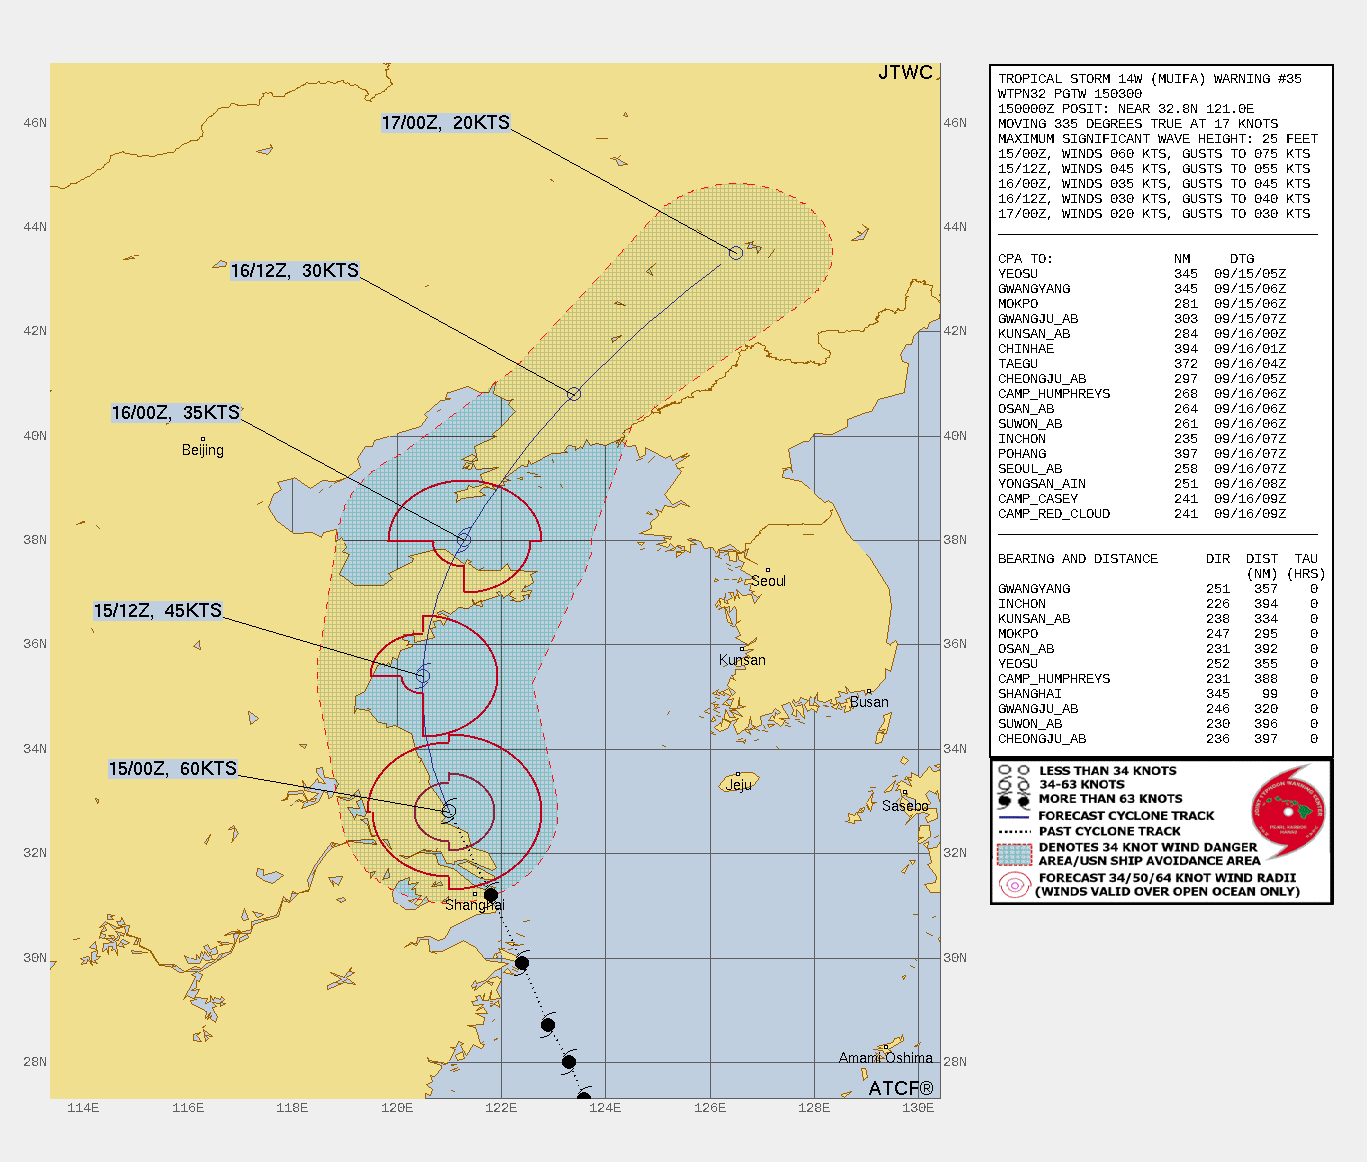 FORECAST REASONING.  SIGNIFICANT FORECAST CHANGES: THERE ARE NO SIGNIFICANT CHANGES TO THE FORECAST FROM THE PREVIOUS WARNING.  FORECAST DISCUSSION: TS MUIFA WILL CONTINUE NORTHWARD IN THE EAST CHINA SEA AND MAKE ANOTHER LANDFALL ON SHANDONG BANDAO PENINSULA, CREST THE STR AXIS, AND AFTER TAU 12, ACCELERATE NORTHEASTWARD VIA THE YELLOW SEA AND MAKE A FINAL LANDFALL ON POHAI PENINSULA JUST BEFORE TAU 24. THE UNFAVORABLE CONDITIONS WILL CONTINUE TO RAPIDLY ERODE THE SYSTEM LEADING TO DISSIPATION BY TAU 36, LIKELY SOONER, AS IT DRAGS FURTHER INLAND INTO NORTHEASTERN CHINA.